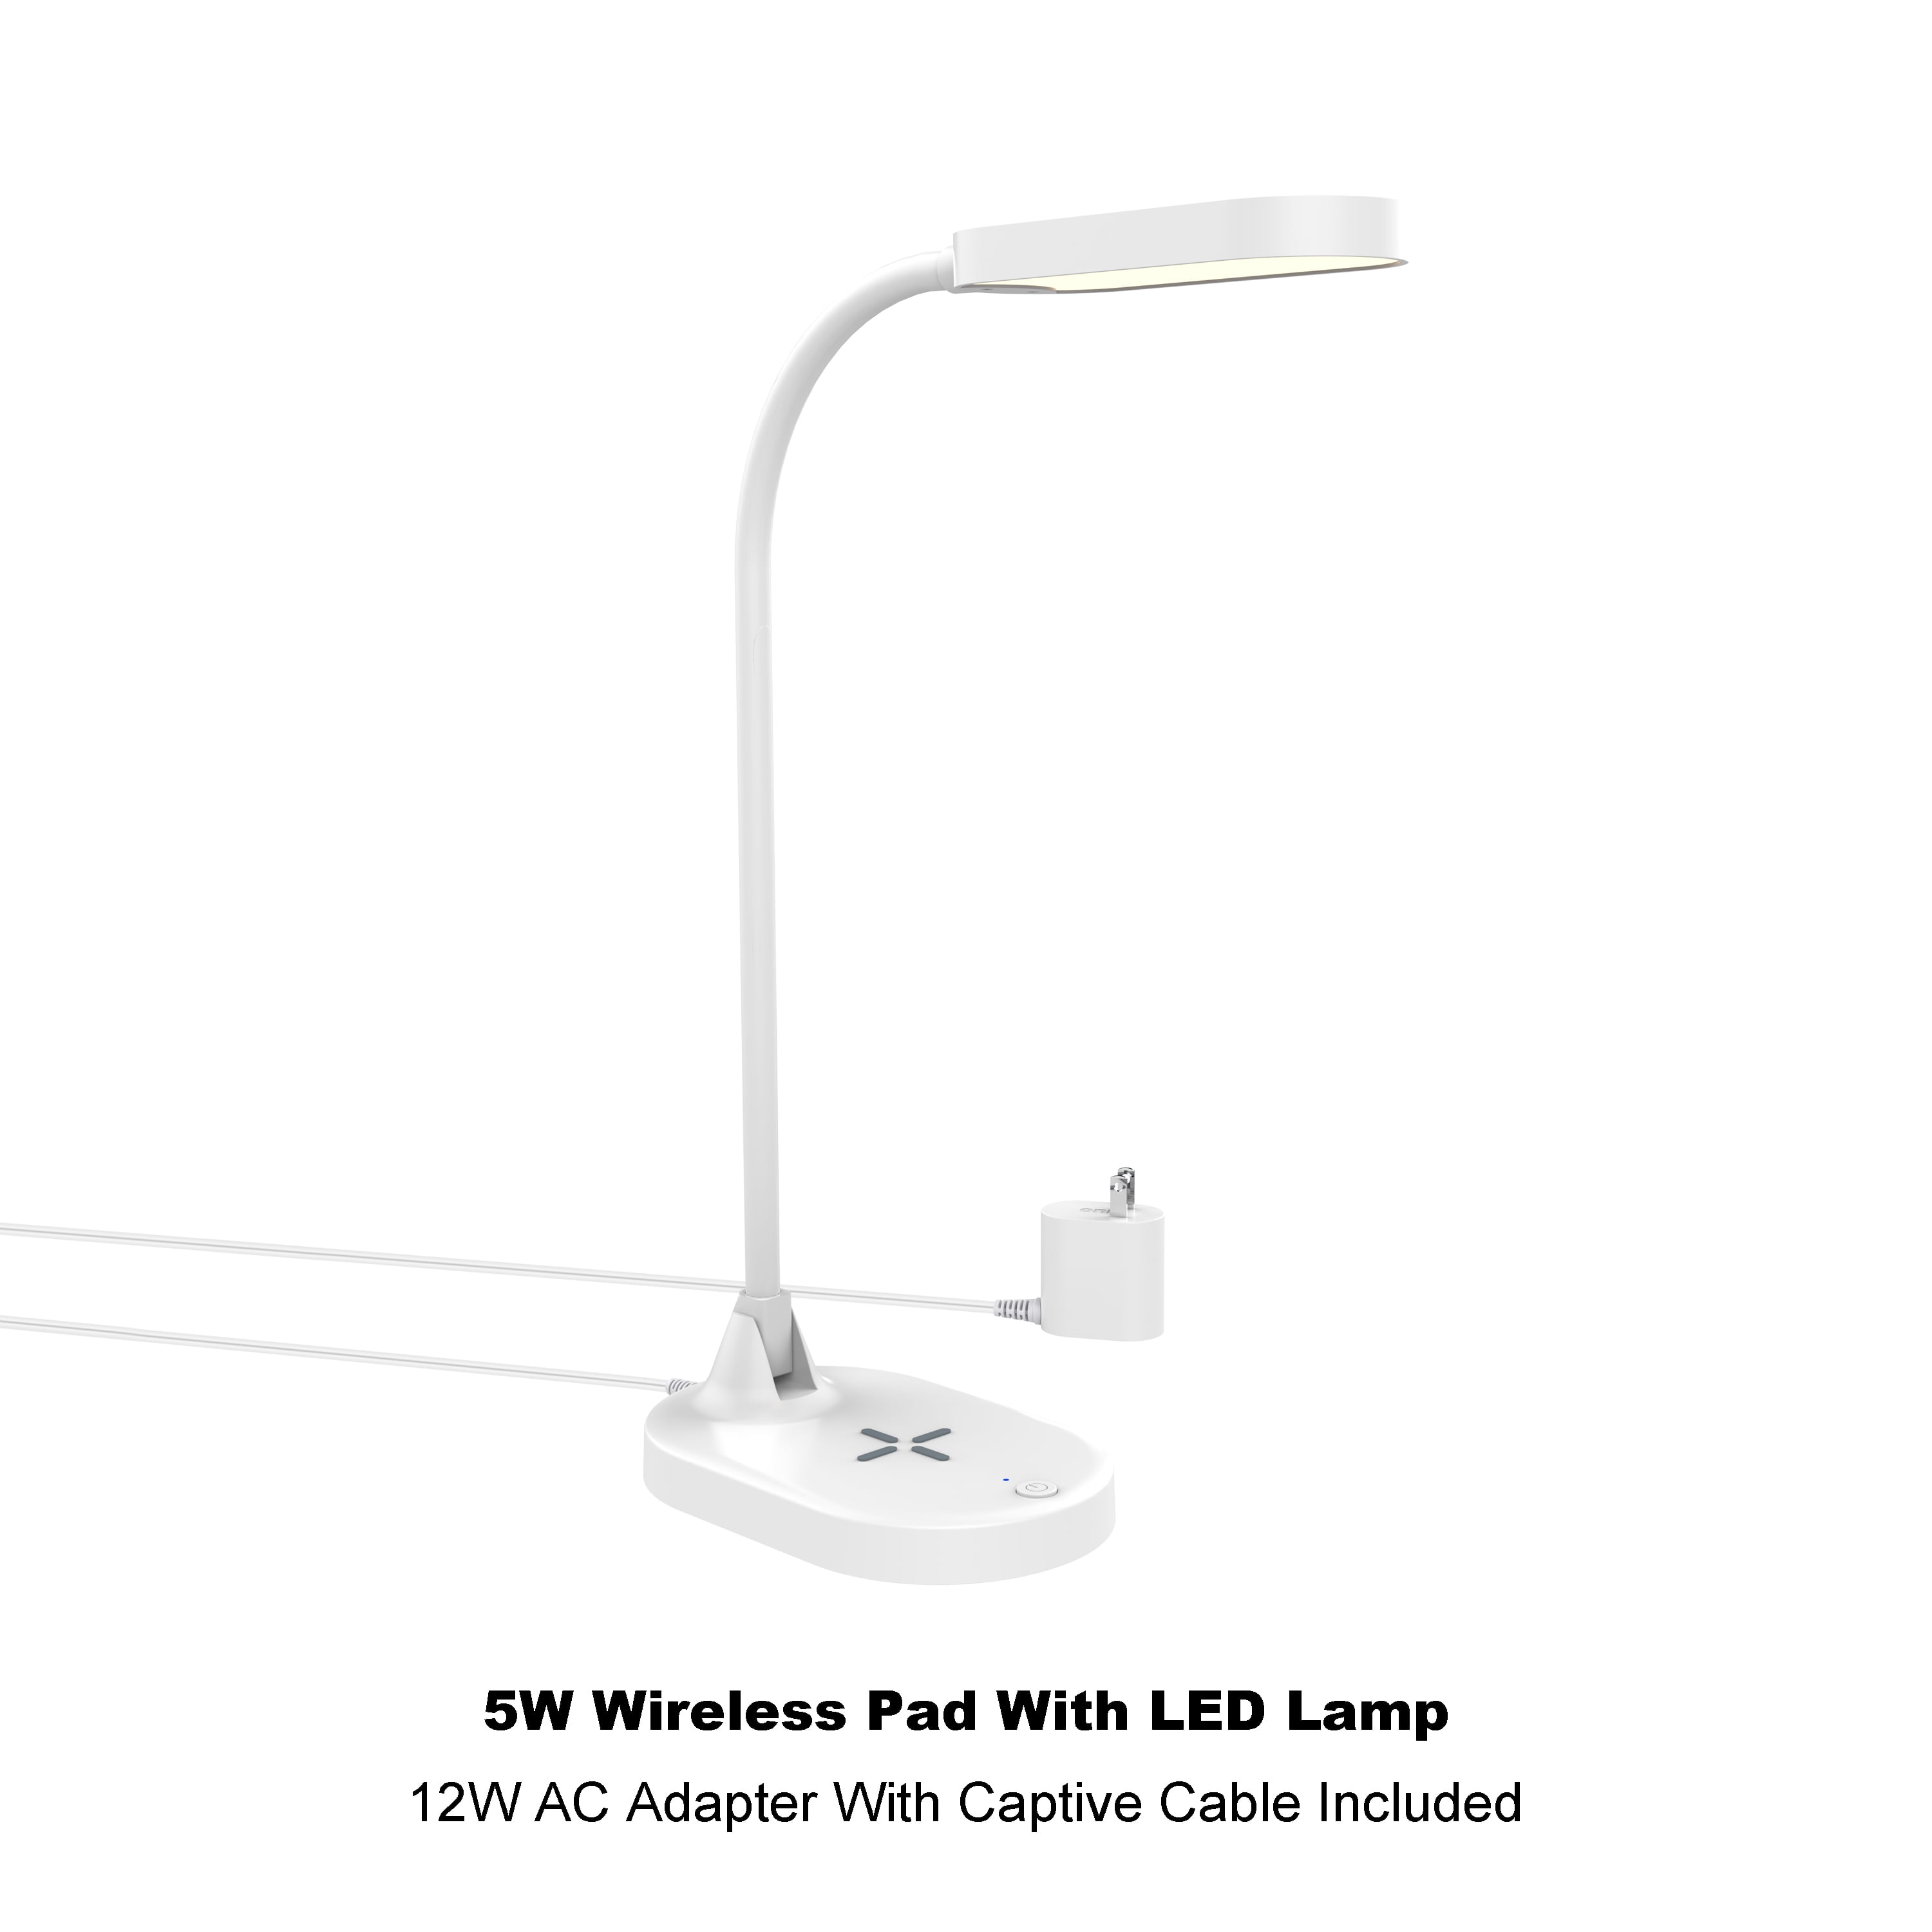 Onn. LED Wireless Charging Lamp, Size: Compact and Travel-Friendly, White